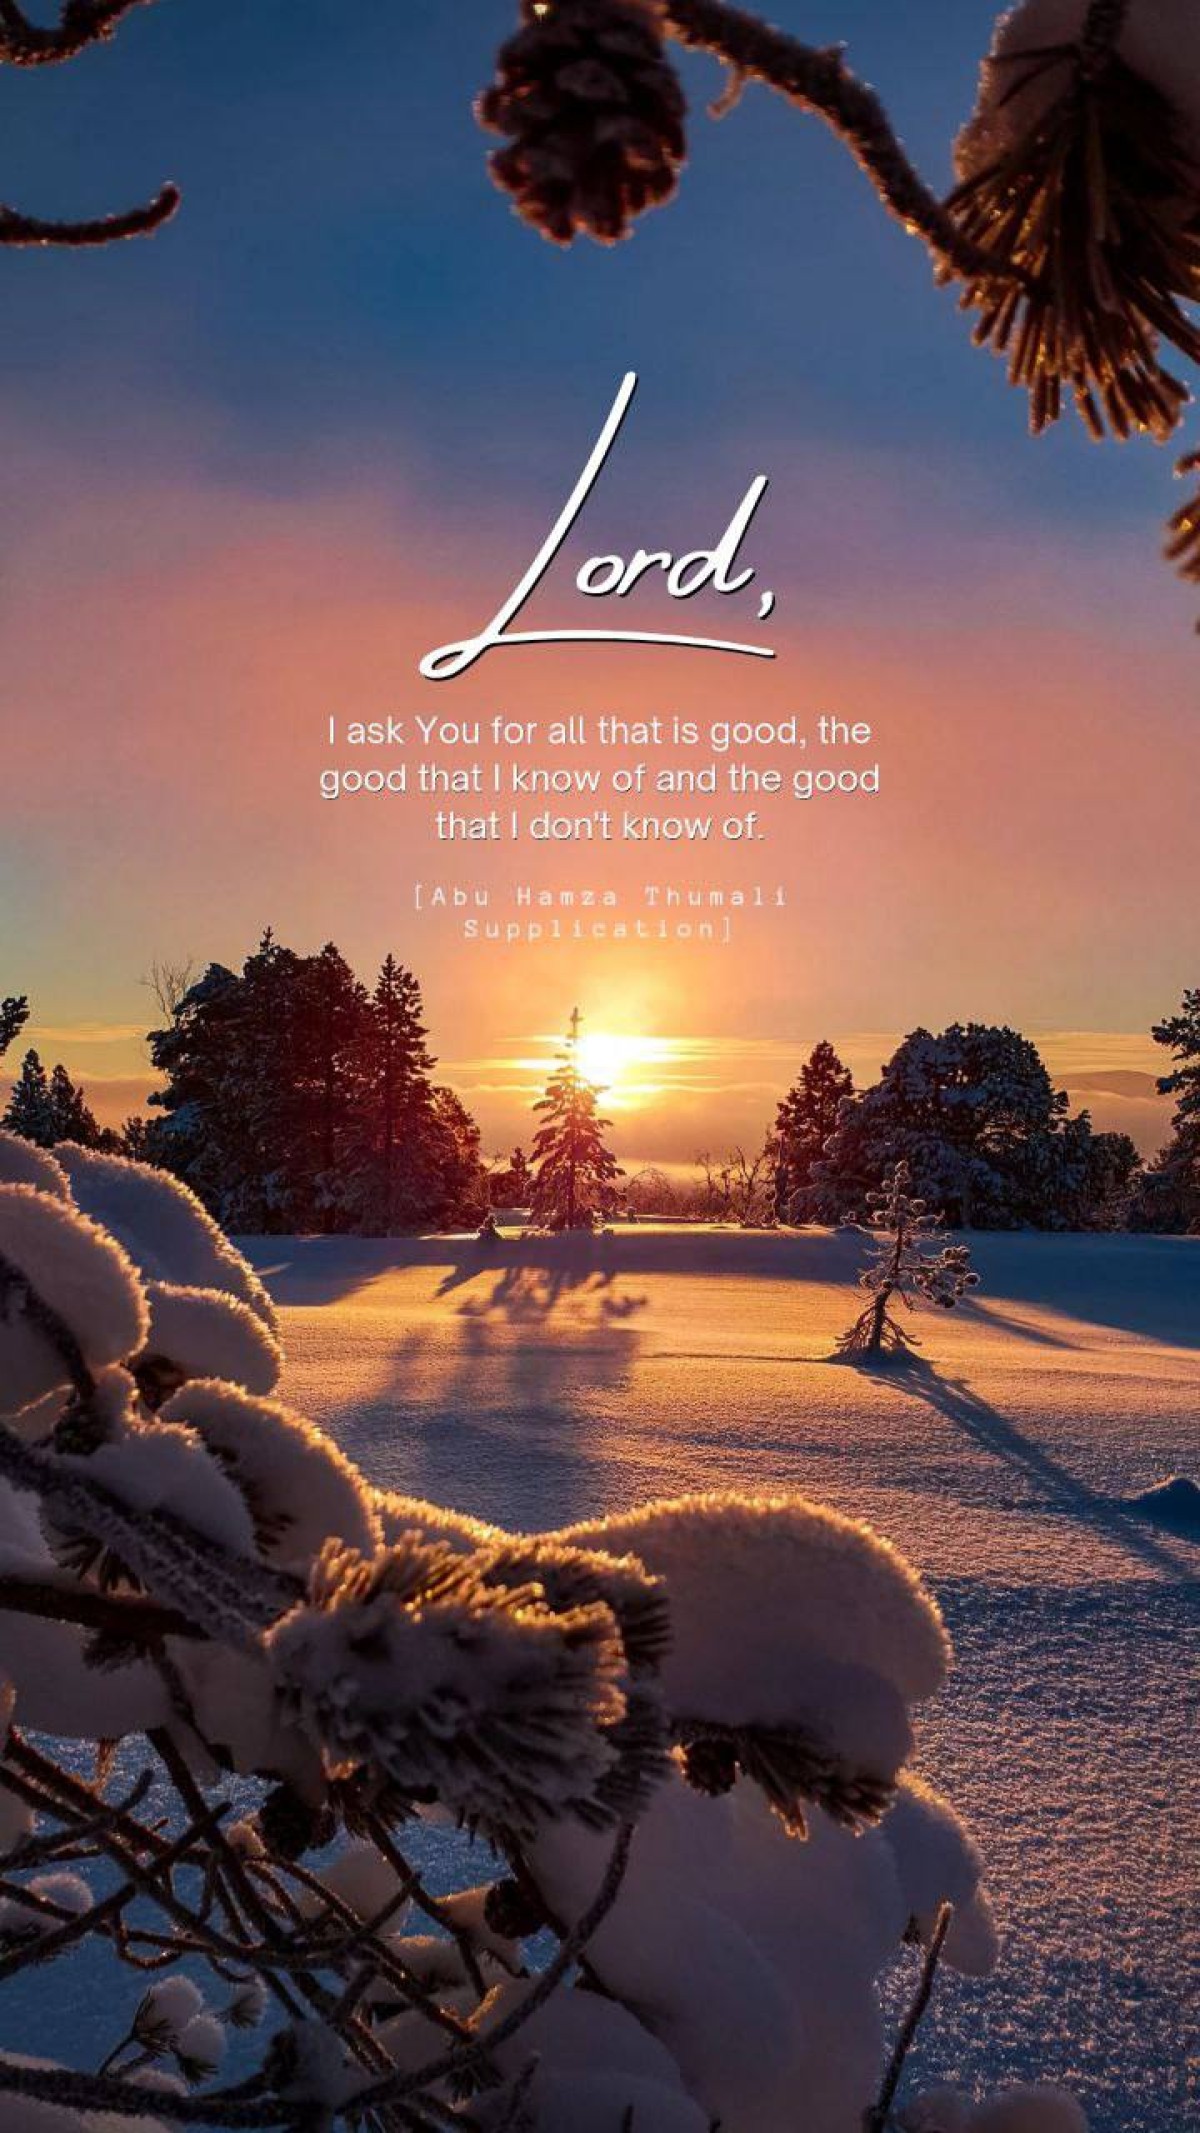 Lord, I ask You for all that is good, the good that I know of and the good that I don't know of.